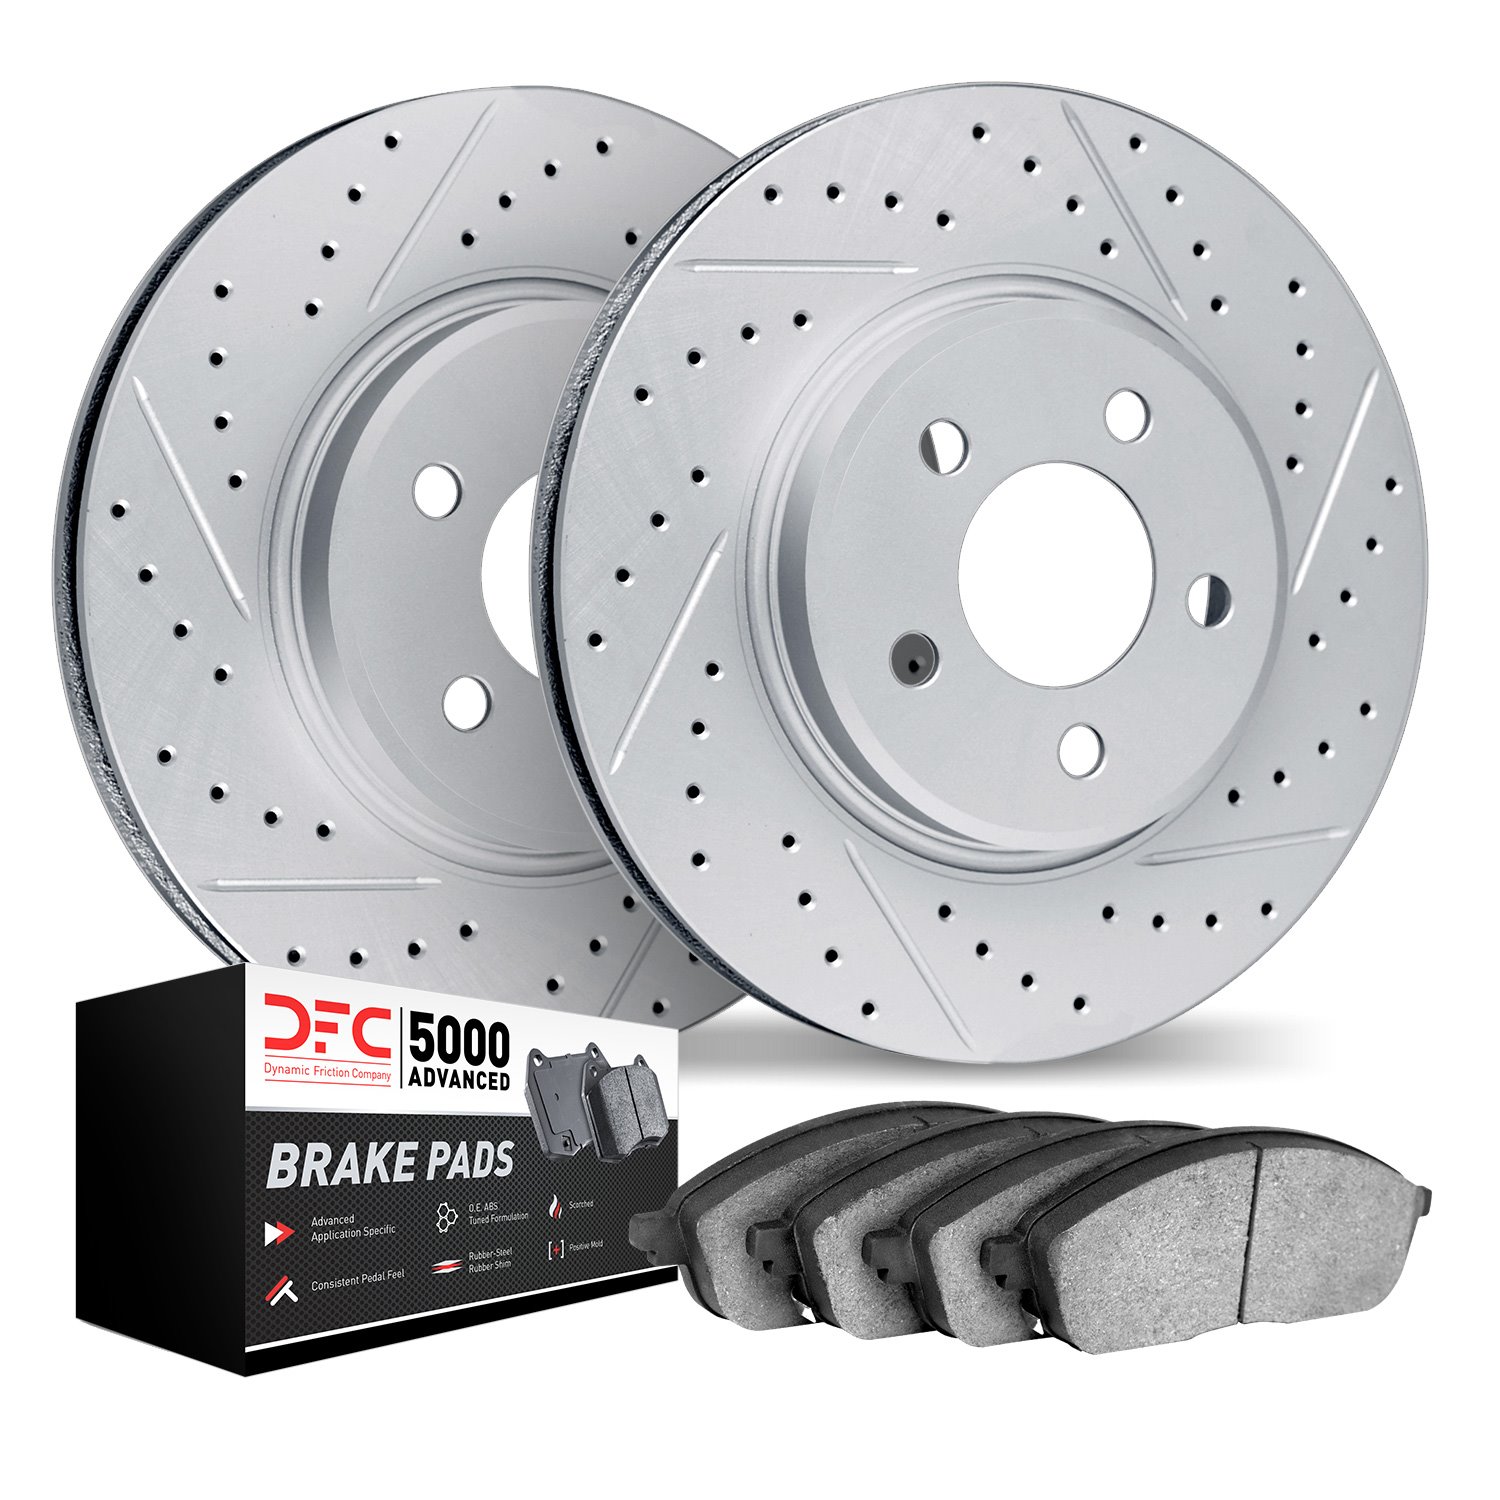 2502-02005 Geoperformance Drilled/Slotted Rotors w/5000 Advanced Brake Pads Kit, 1977-1988 Porsche, Position: Front